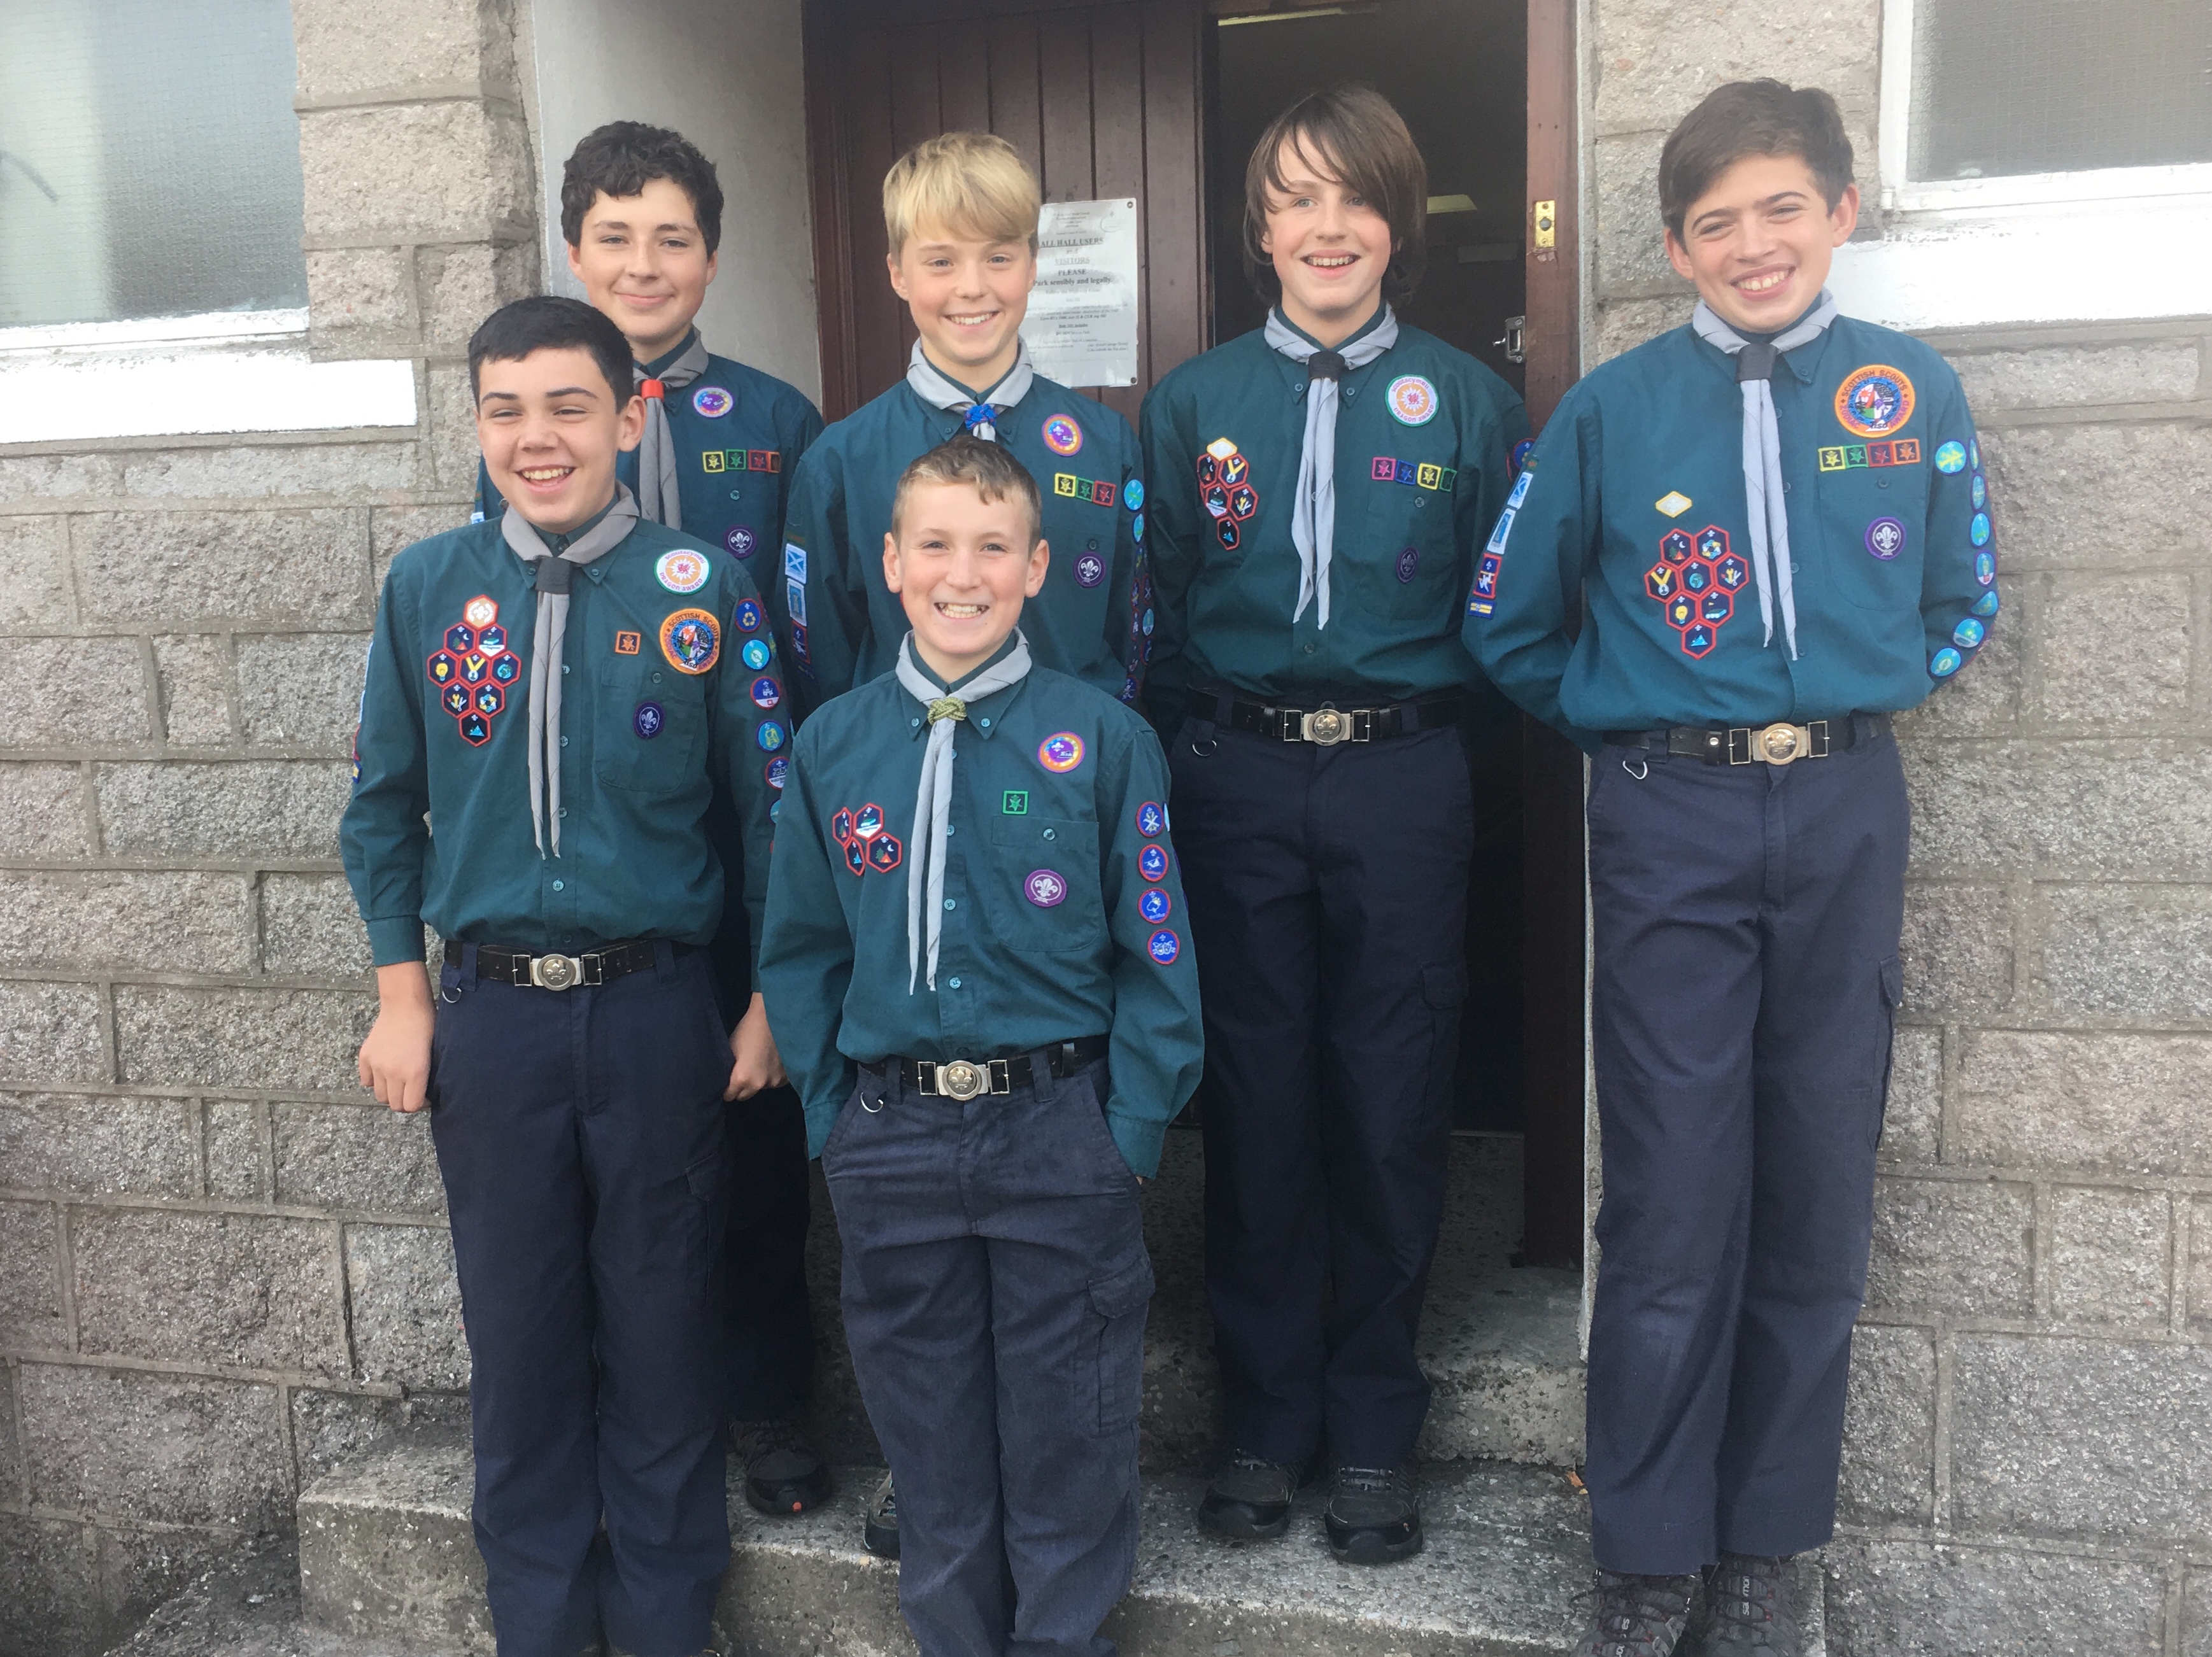 The team that took part in the camping competition.

Front row: Aidan Page, Callum Innes, back row: Callum Campbell, Zander Williams, Alex McMaster, William Ashdown